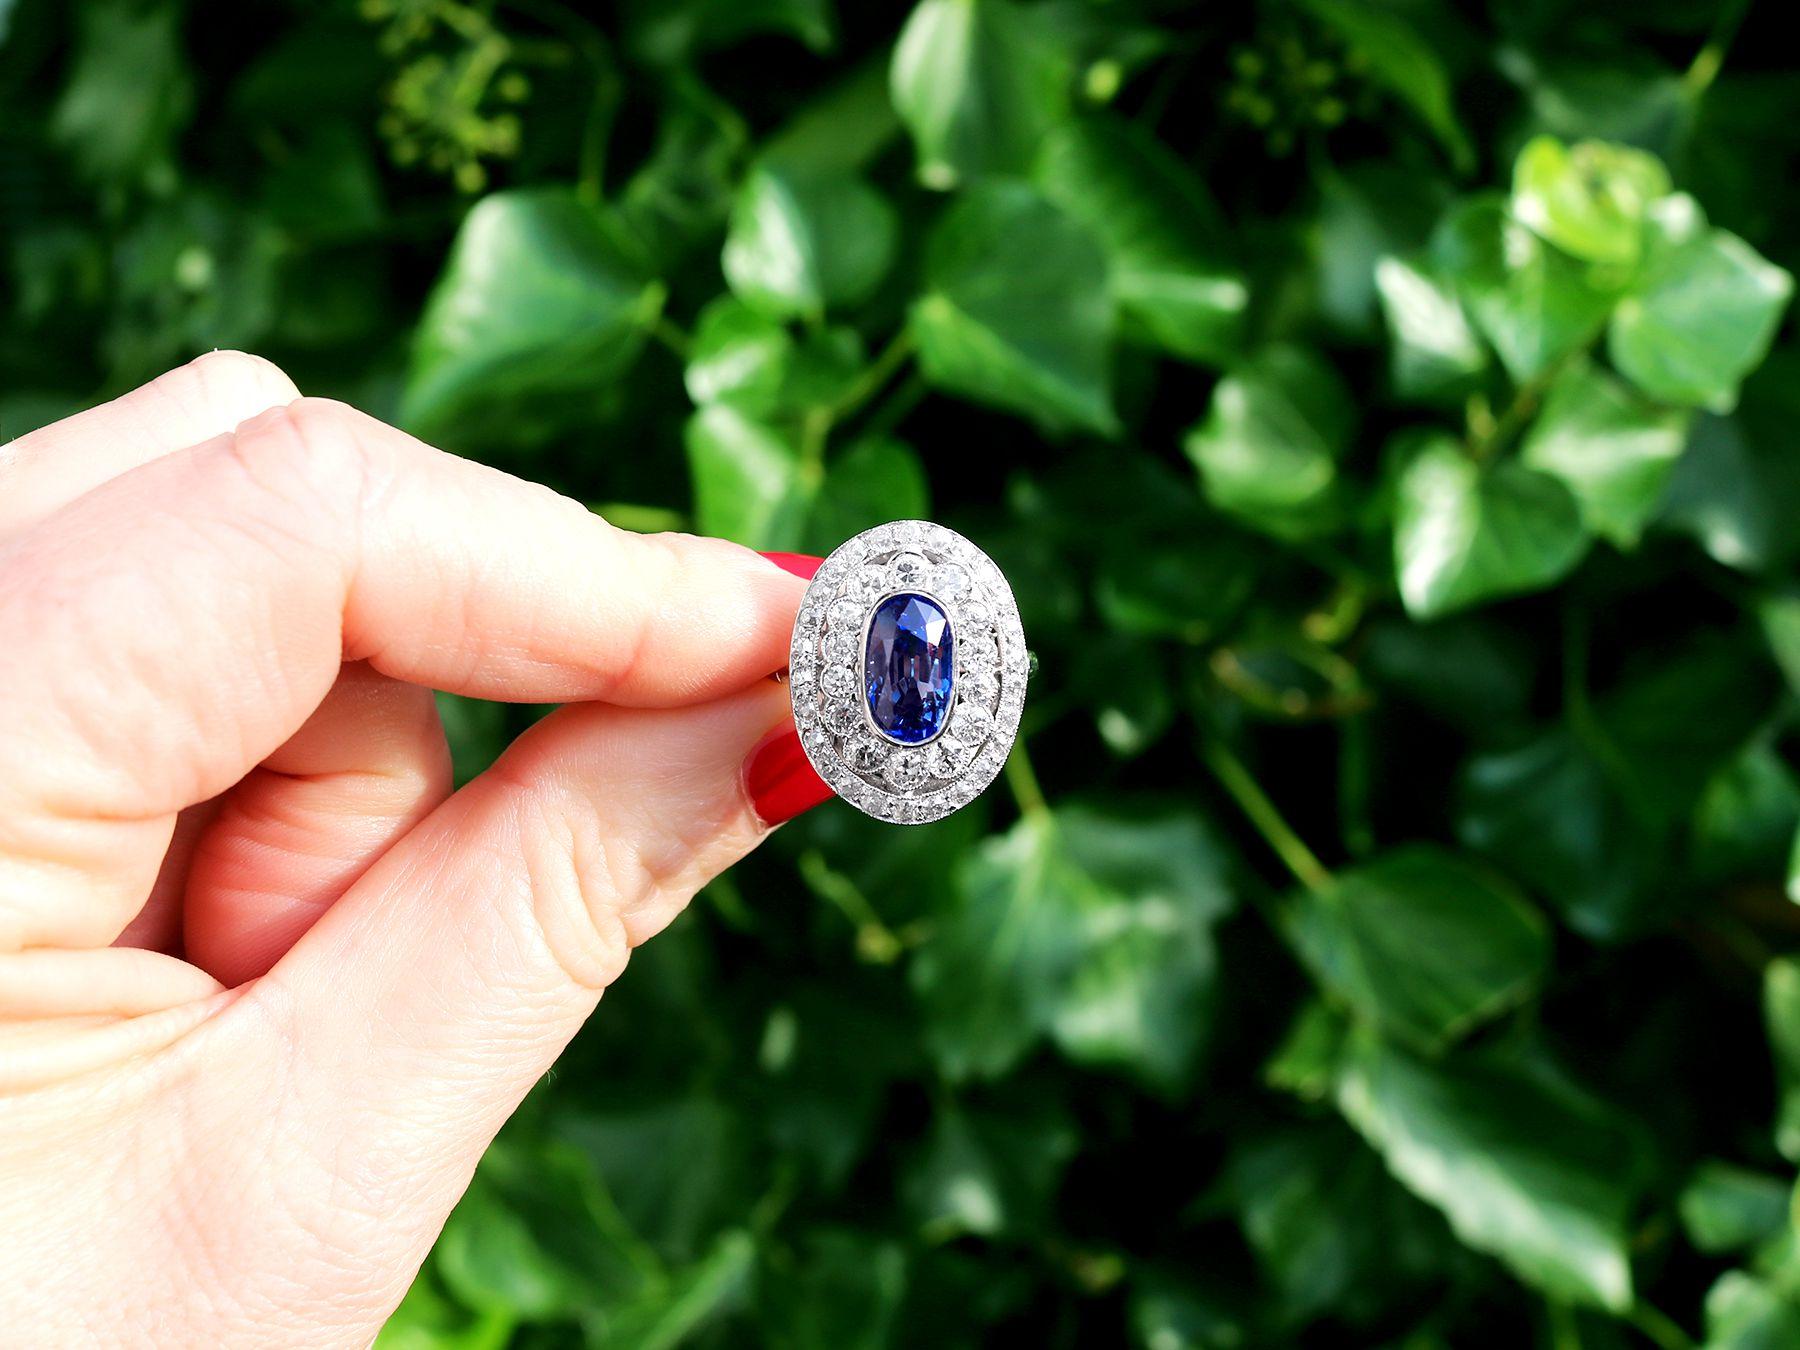 A stunning, fine and impressive 3.50 carat Ceylon sapphire and 2.48 carat diamond, platinum dress ring; part of our diverse antique jewelry collections.

This stunning antique blue sapphire ring has been crafted in platinum.

The pierced millegrain